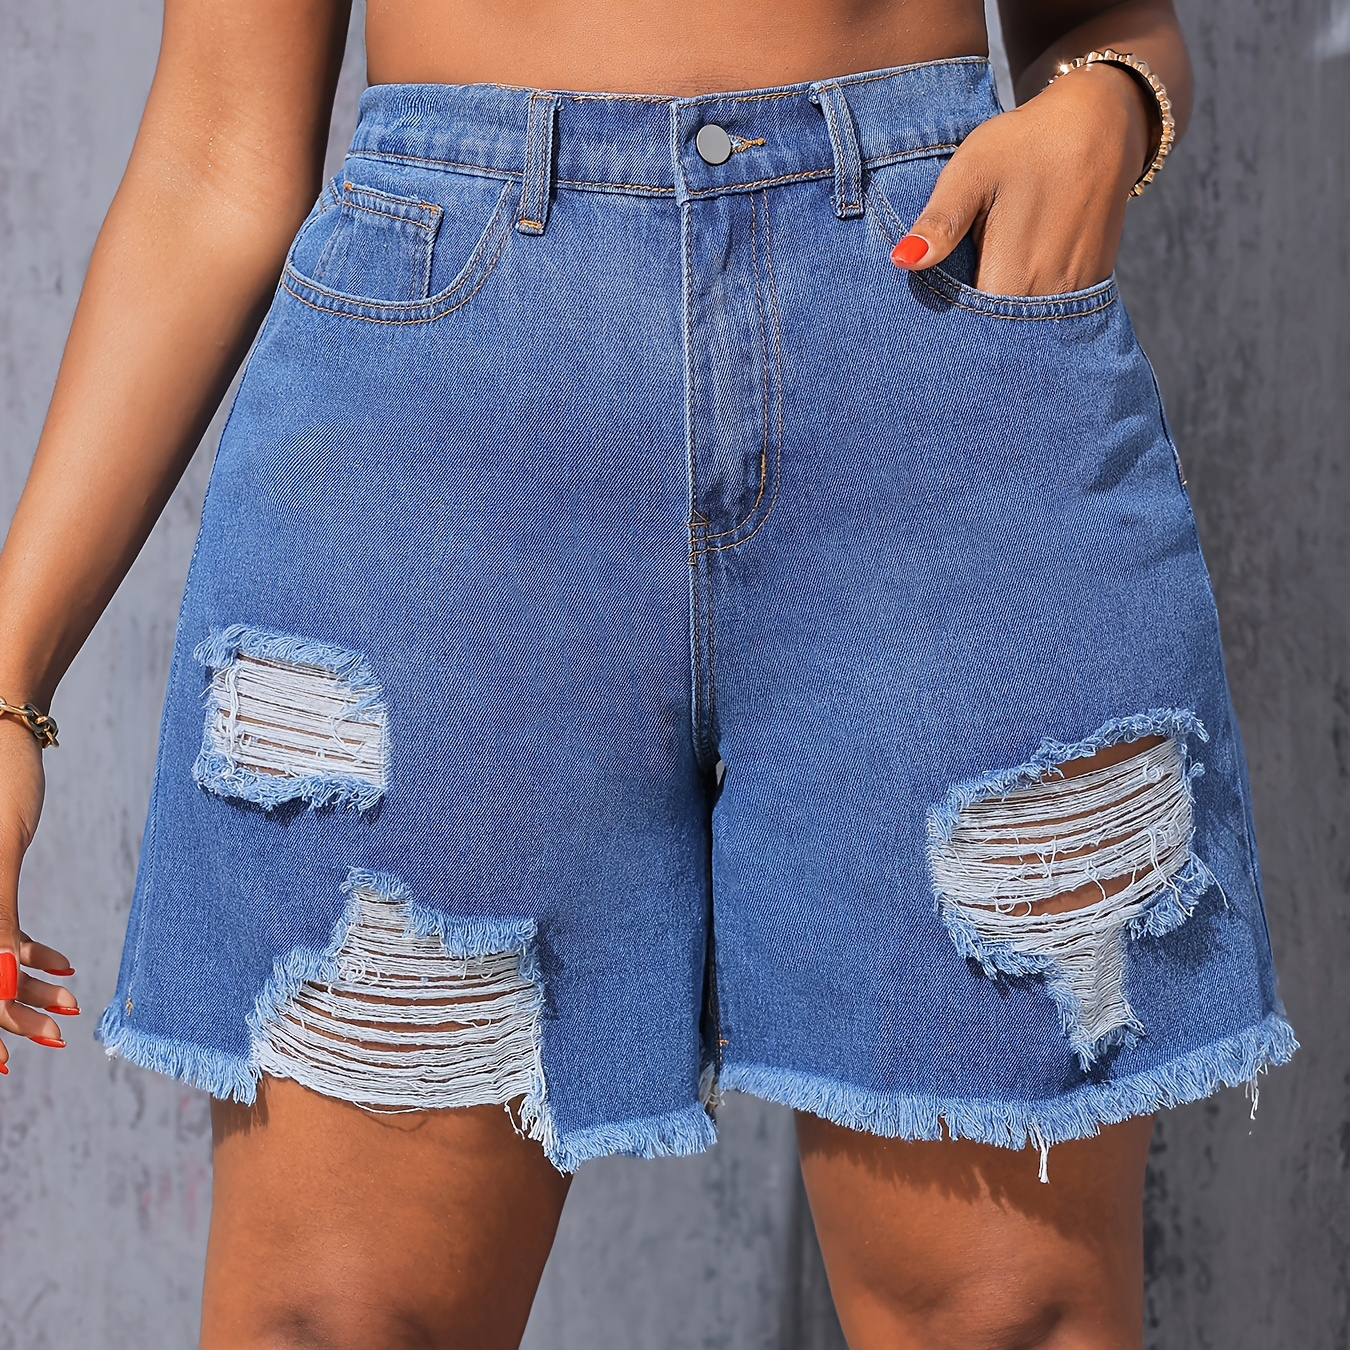 

Women's Plus Size Elastic Waist Casual Denim Shorts, Frayed Hem With Ripped Details, Classic Blue Jean Style For Summer Wear